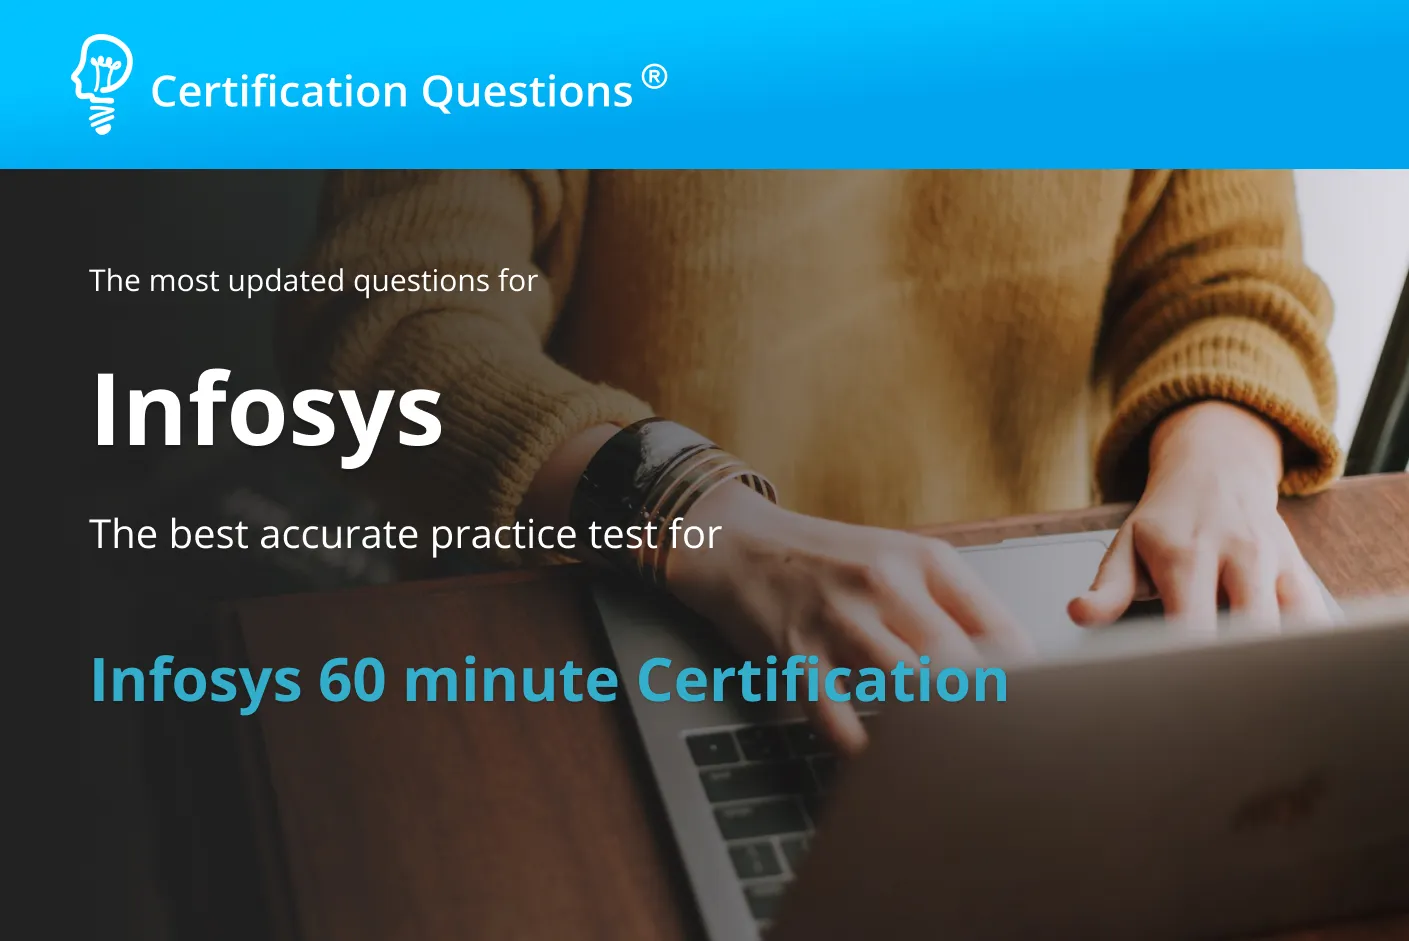 This image is related to Infosys 60 minute Certification Practice test